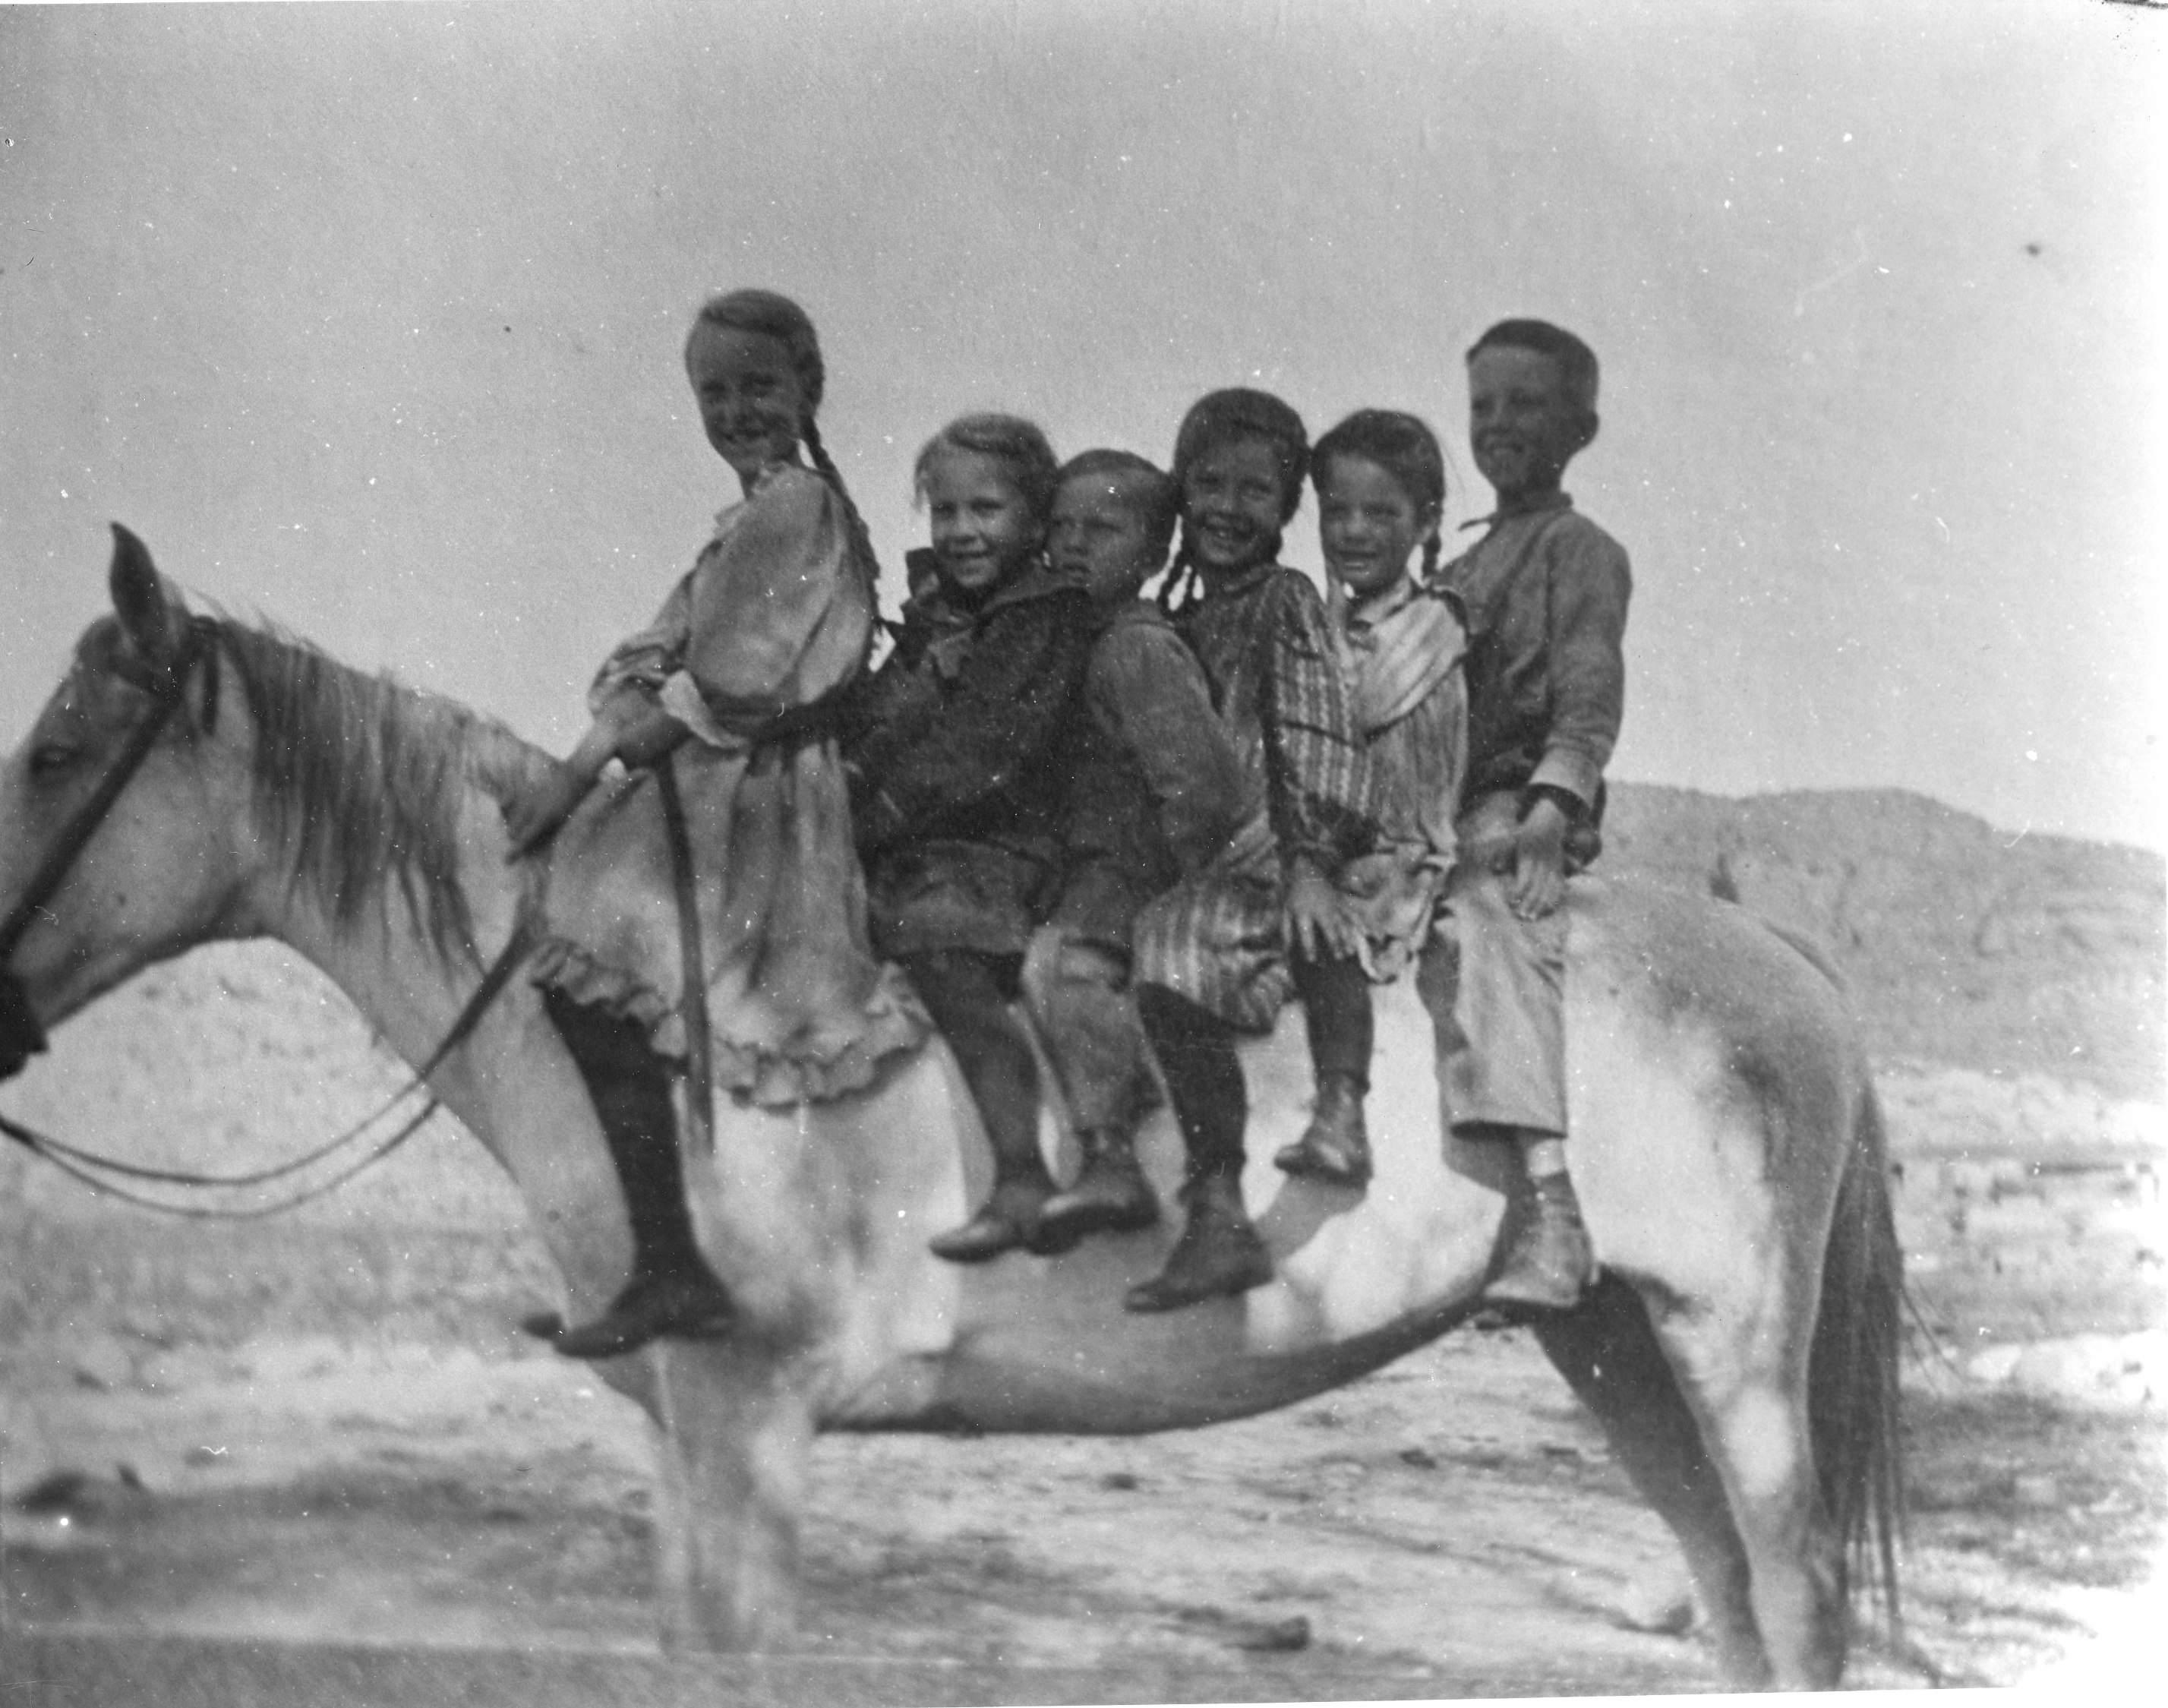 Six children on a horse, probably late 1800s or early 1900s